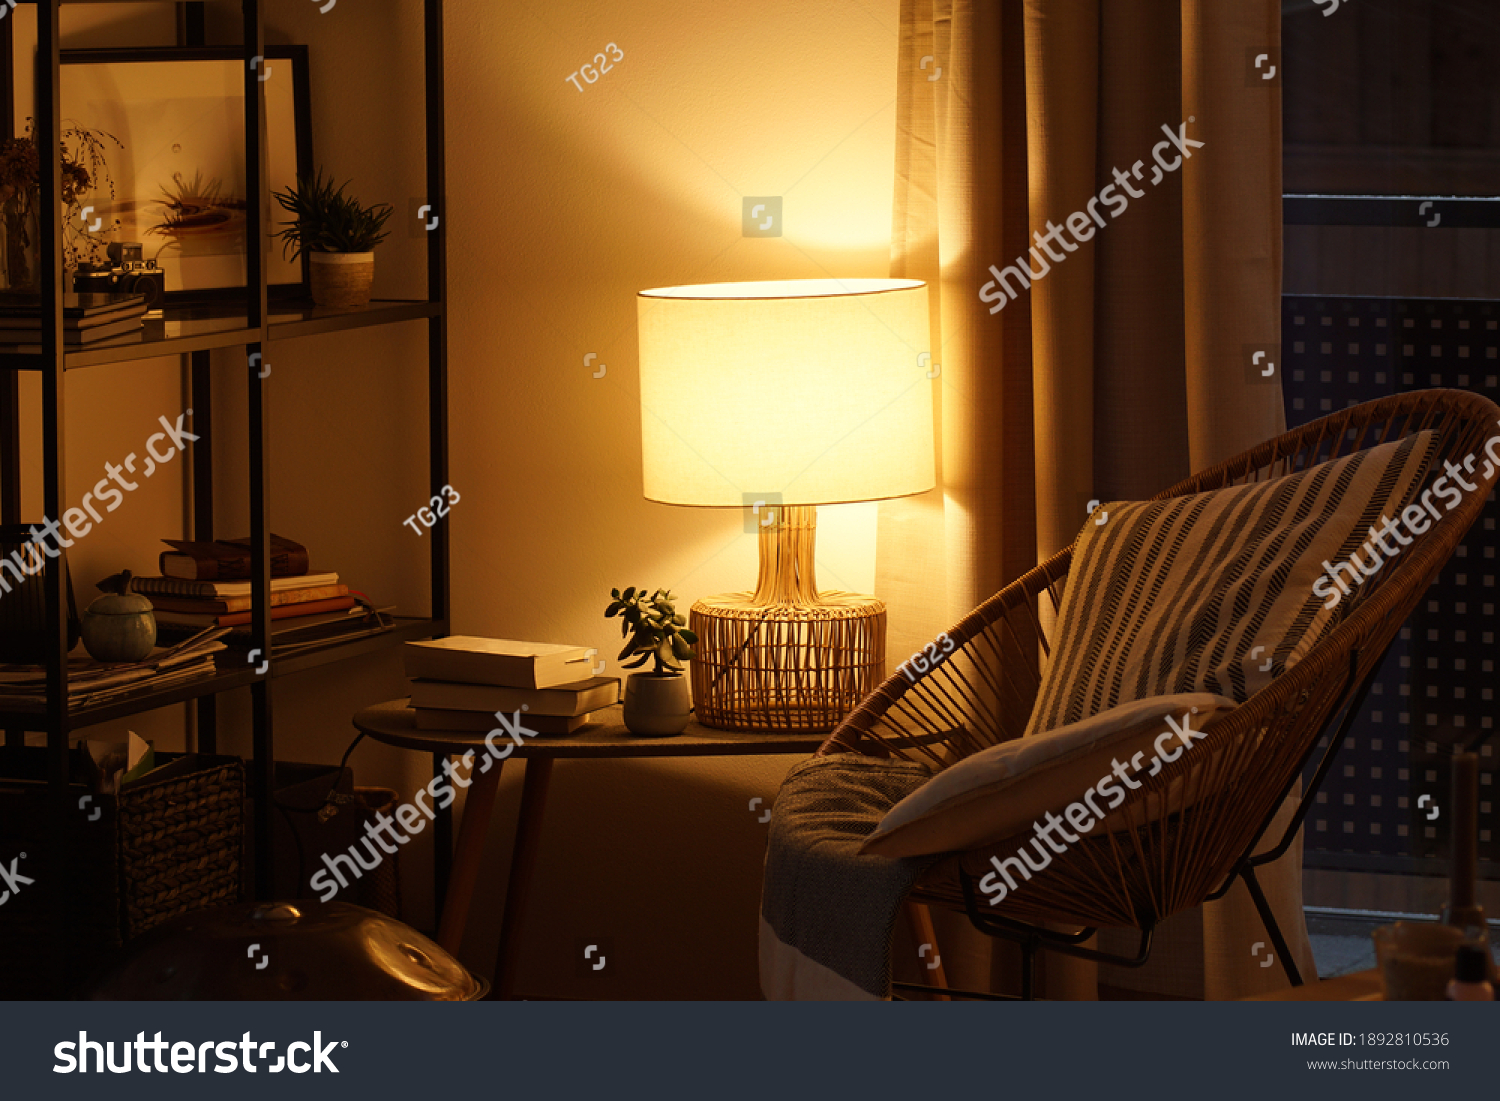 View of a cozy reader's corner with a table lamp spending warm light #1892810536